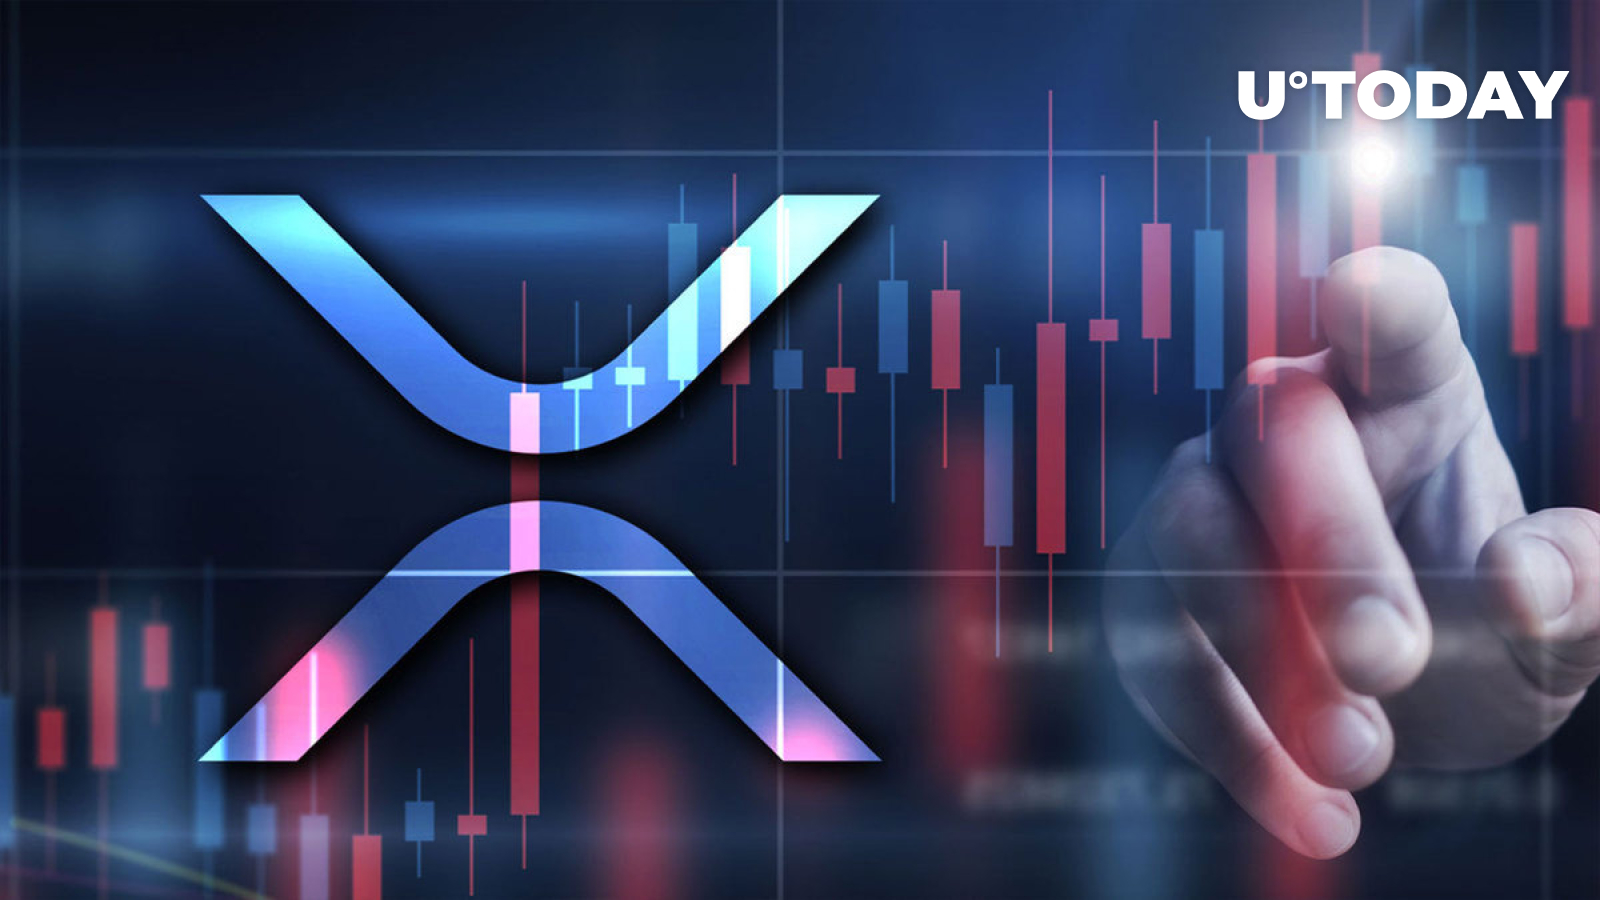 XRP up 28% in Trading Volume Amid Major Inflation Report